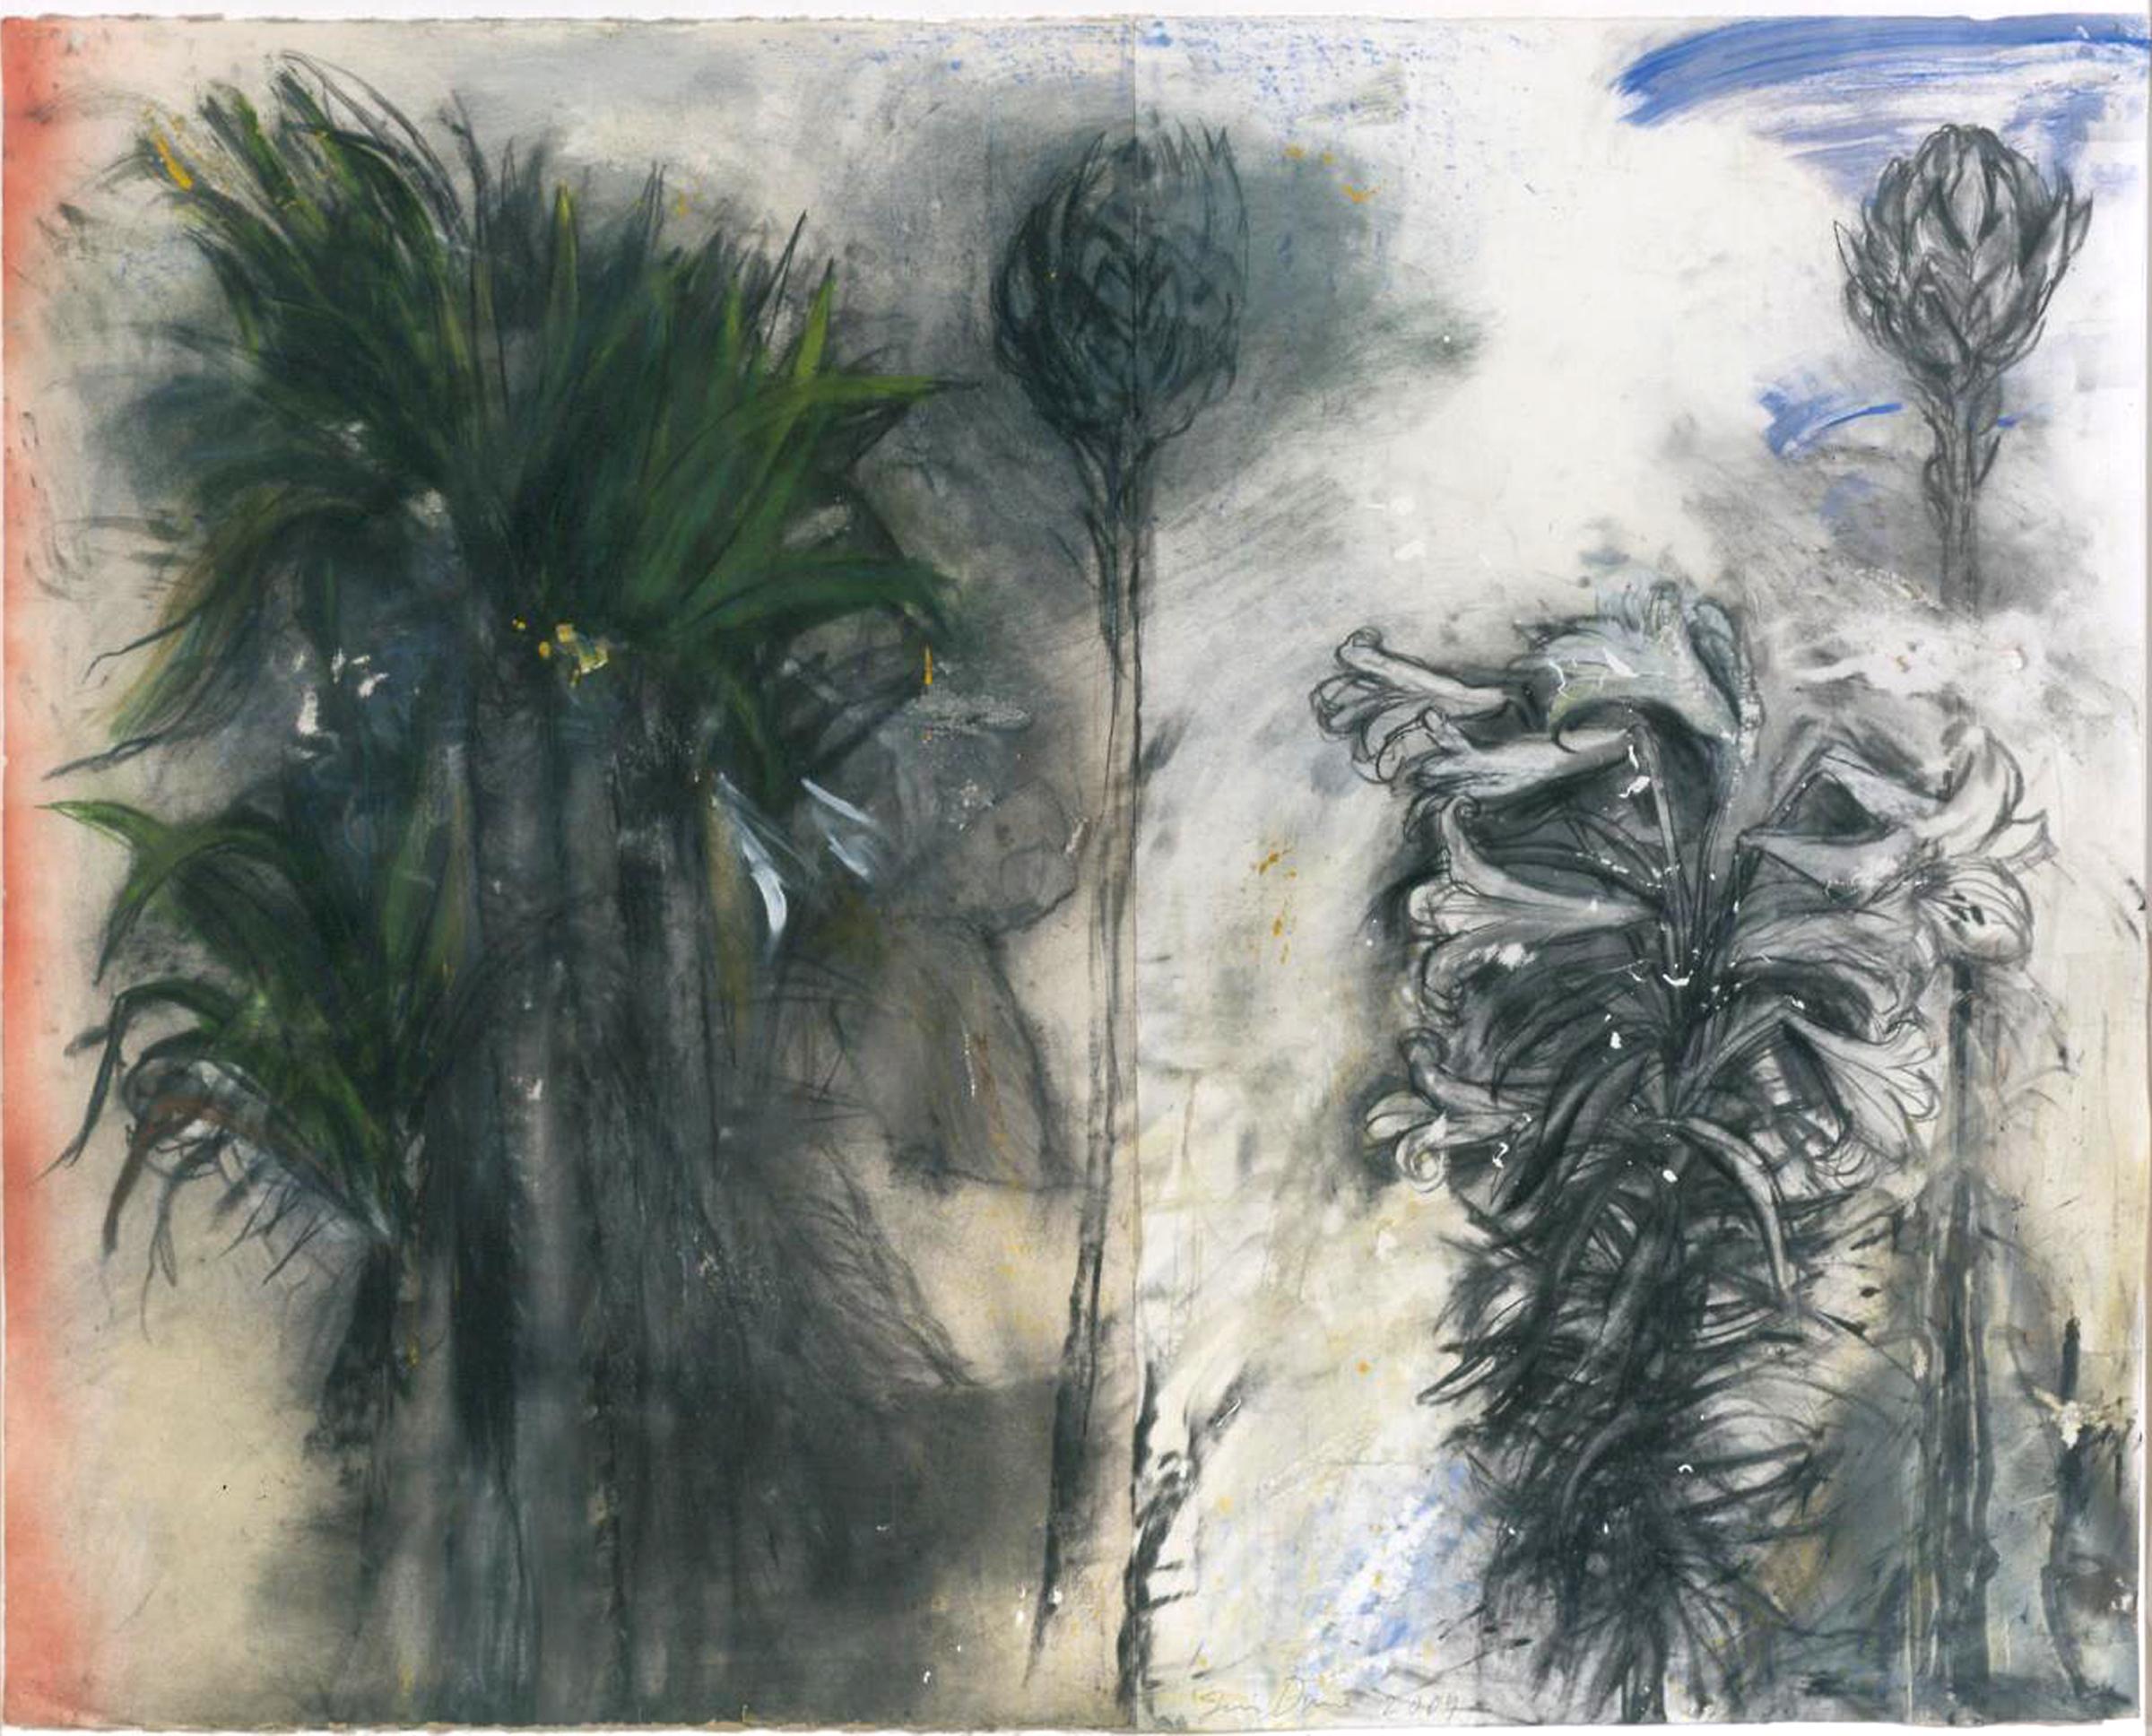 The Issue of Spring - Mixed Media Art by Jim Dine